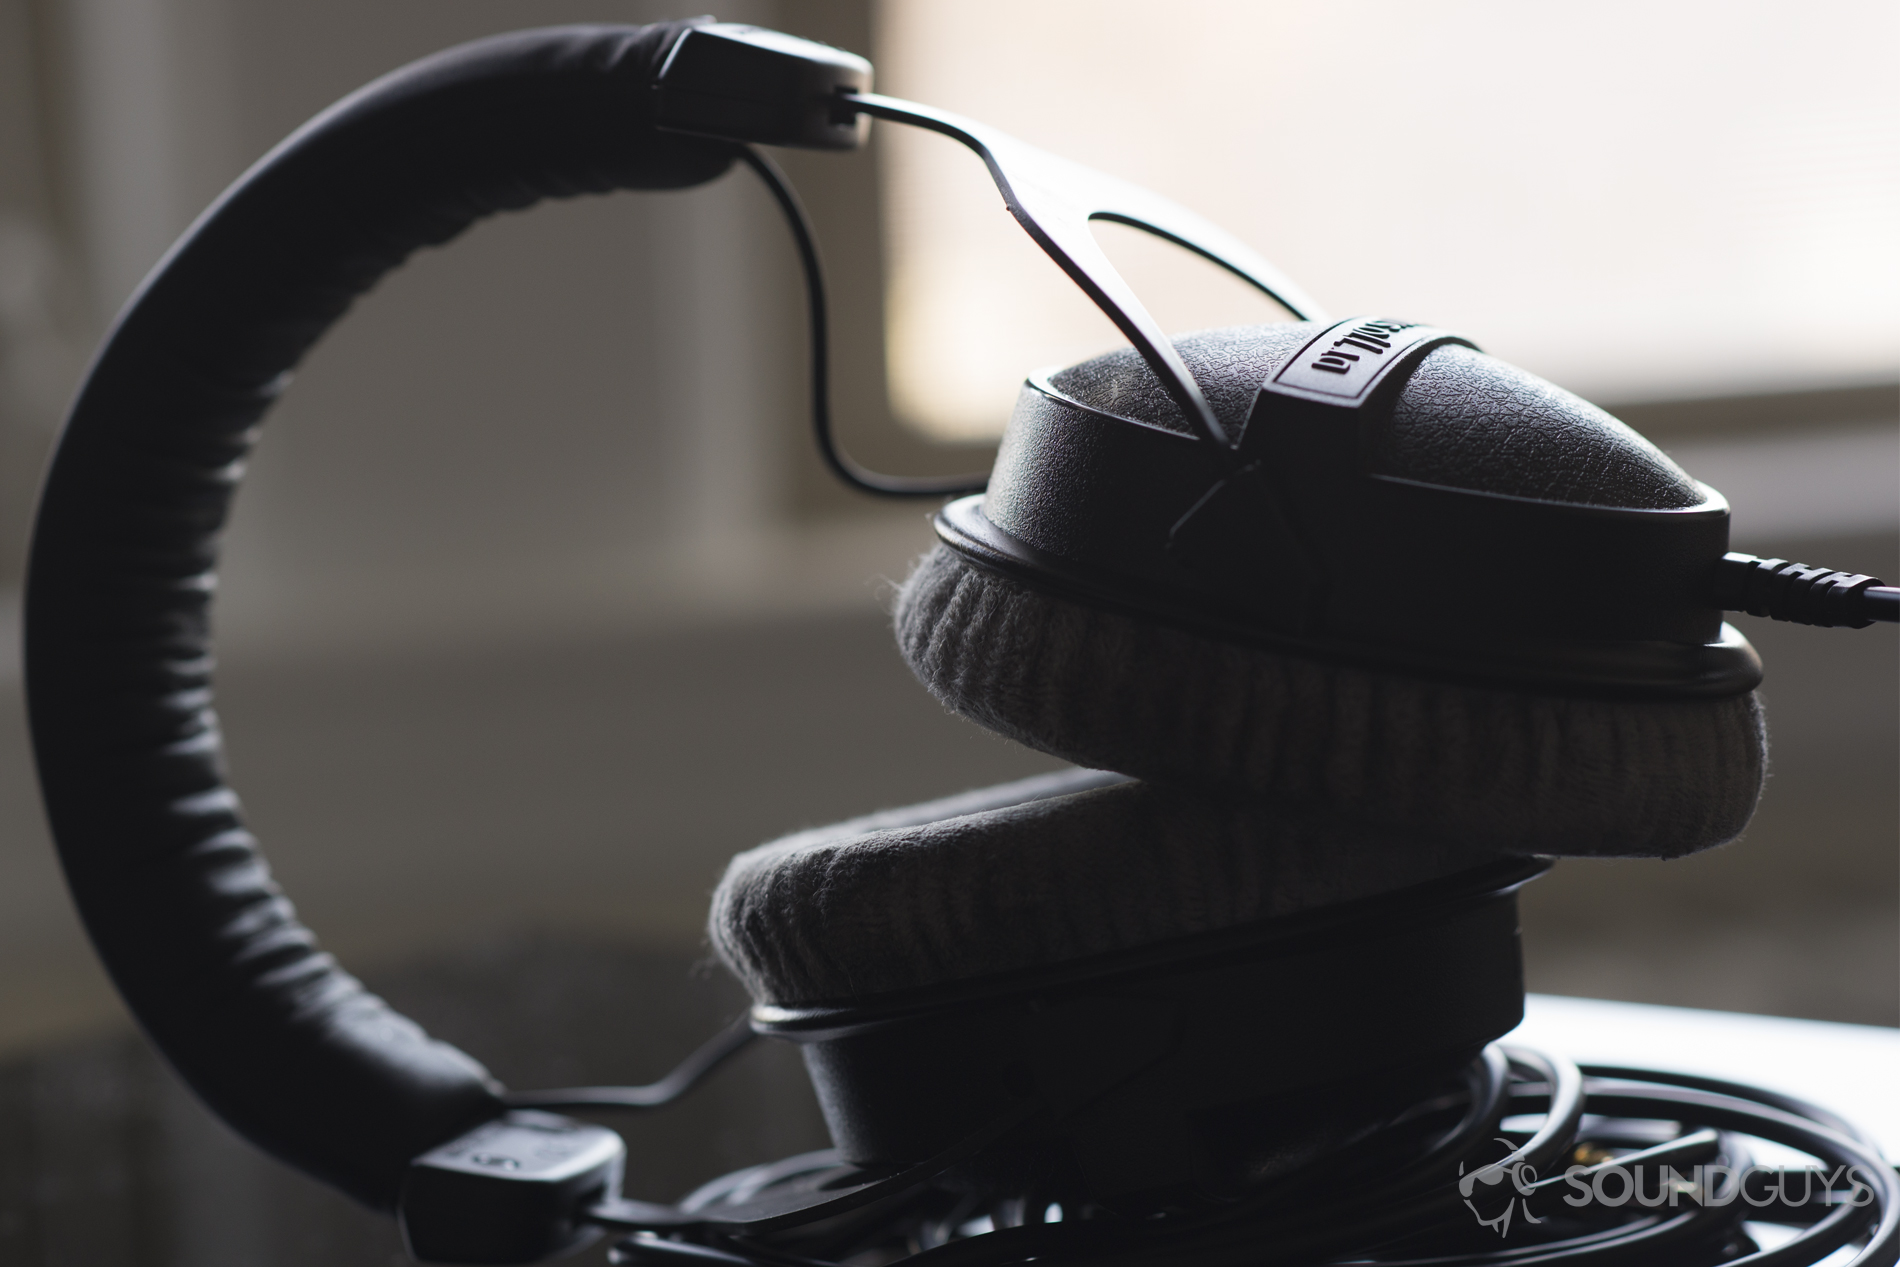 Welcome to the Reference Class – Beyerdynamic DT 770 PRO 80 Ohm